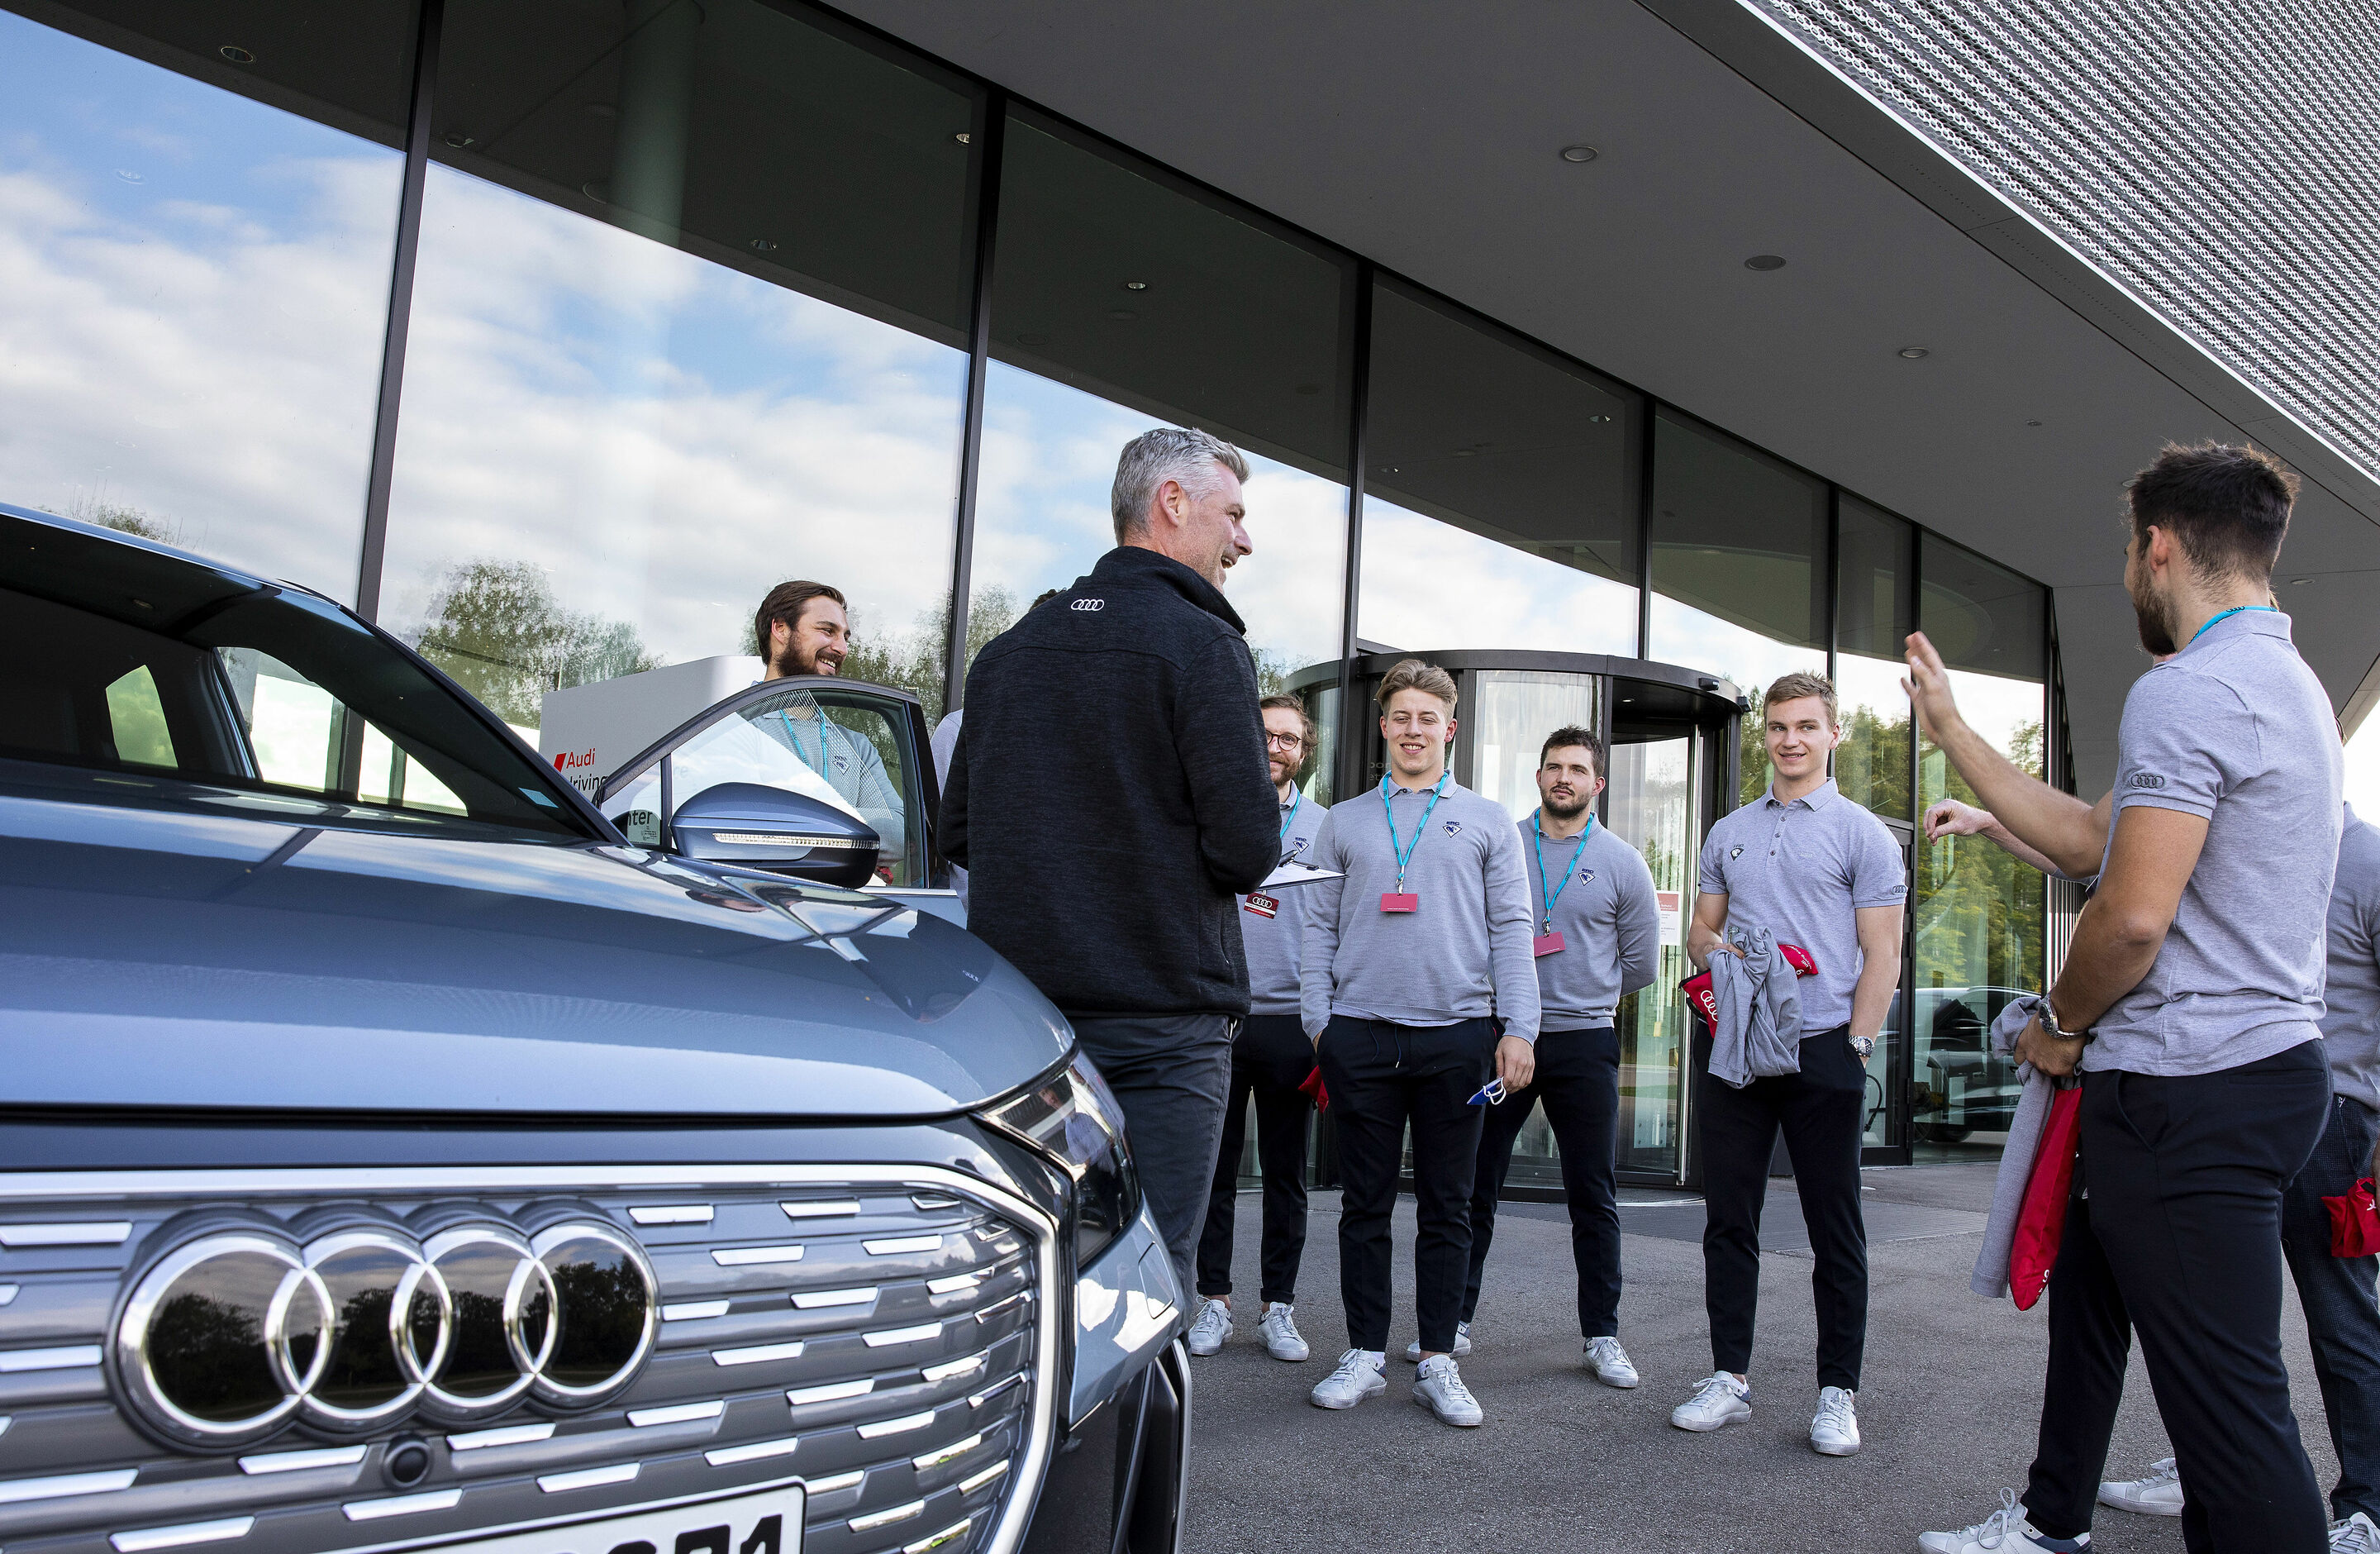 Ingolstadt’s ice hockey team tests top sport models from Audi